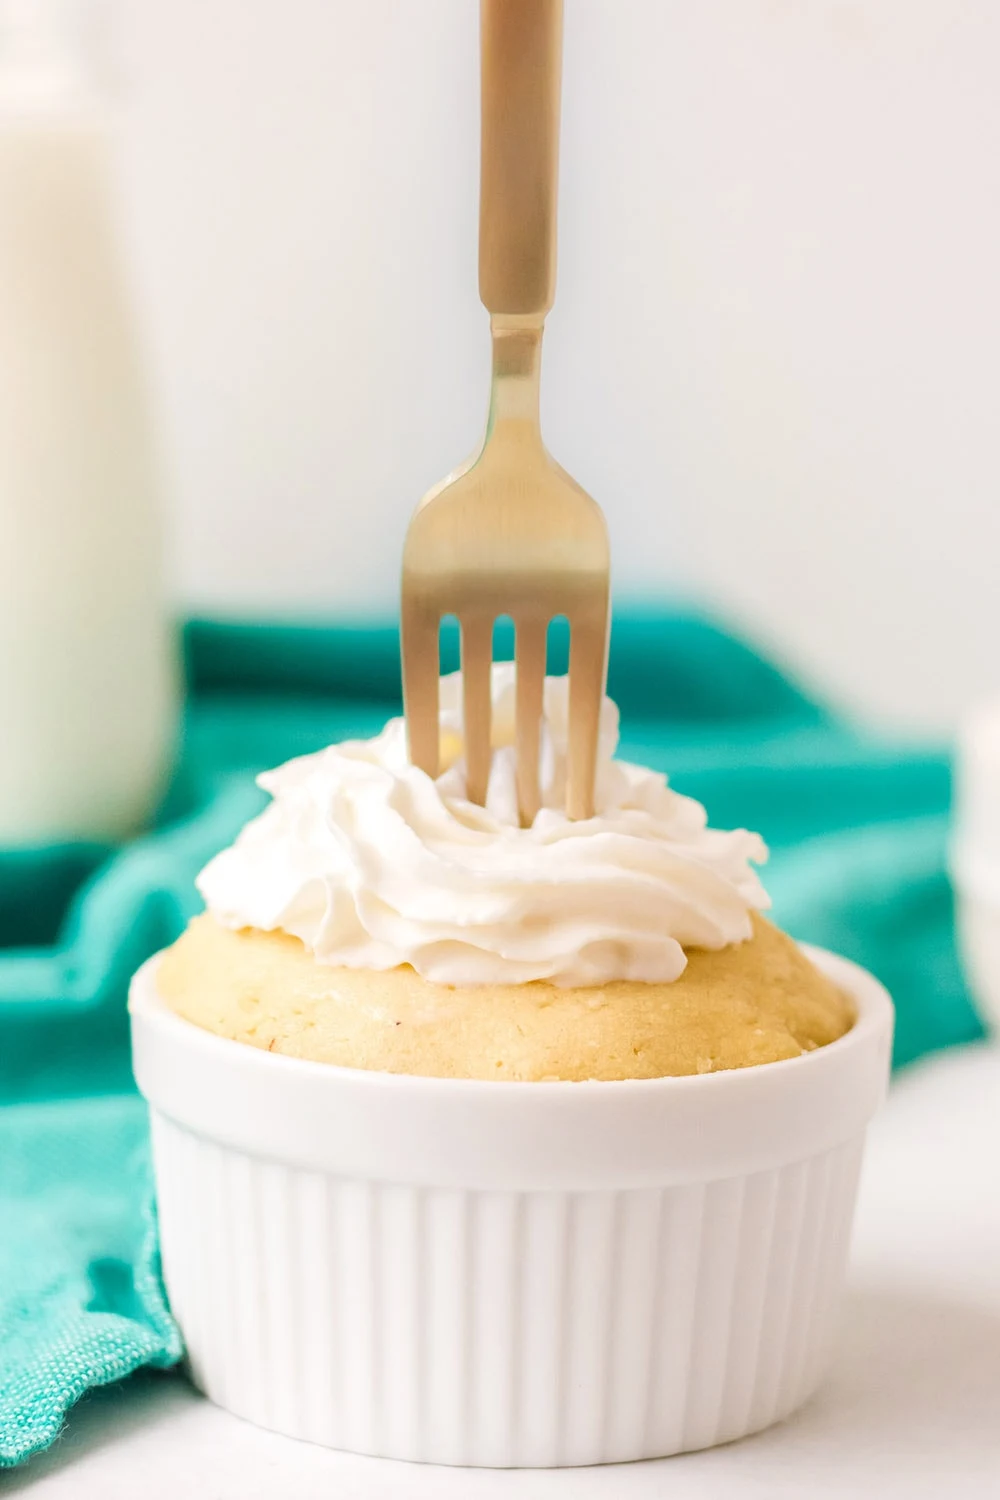 Gold fork in a vanilla mug cake with whipped cream on a table with green napkin.